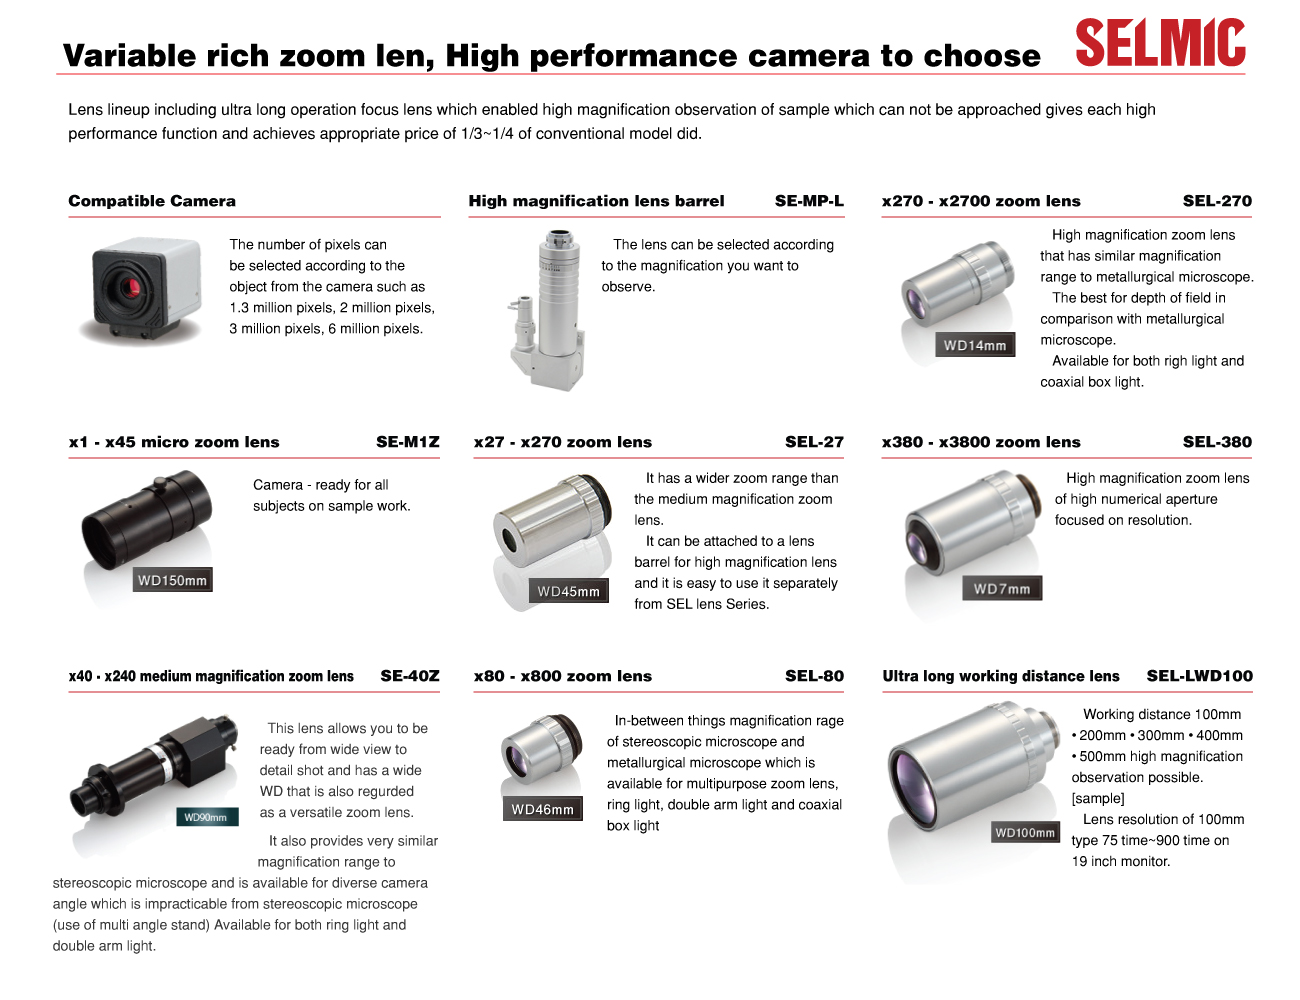 High-Performance Cameras for Microscopy Applications